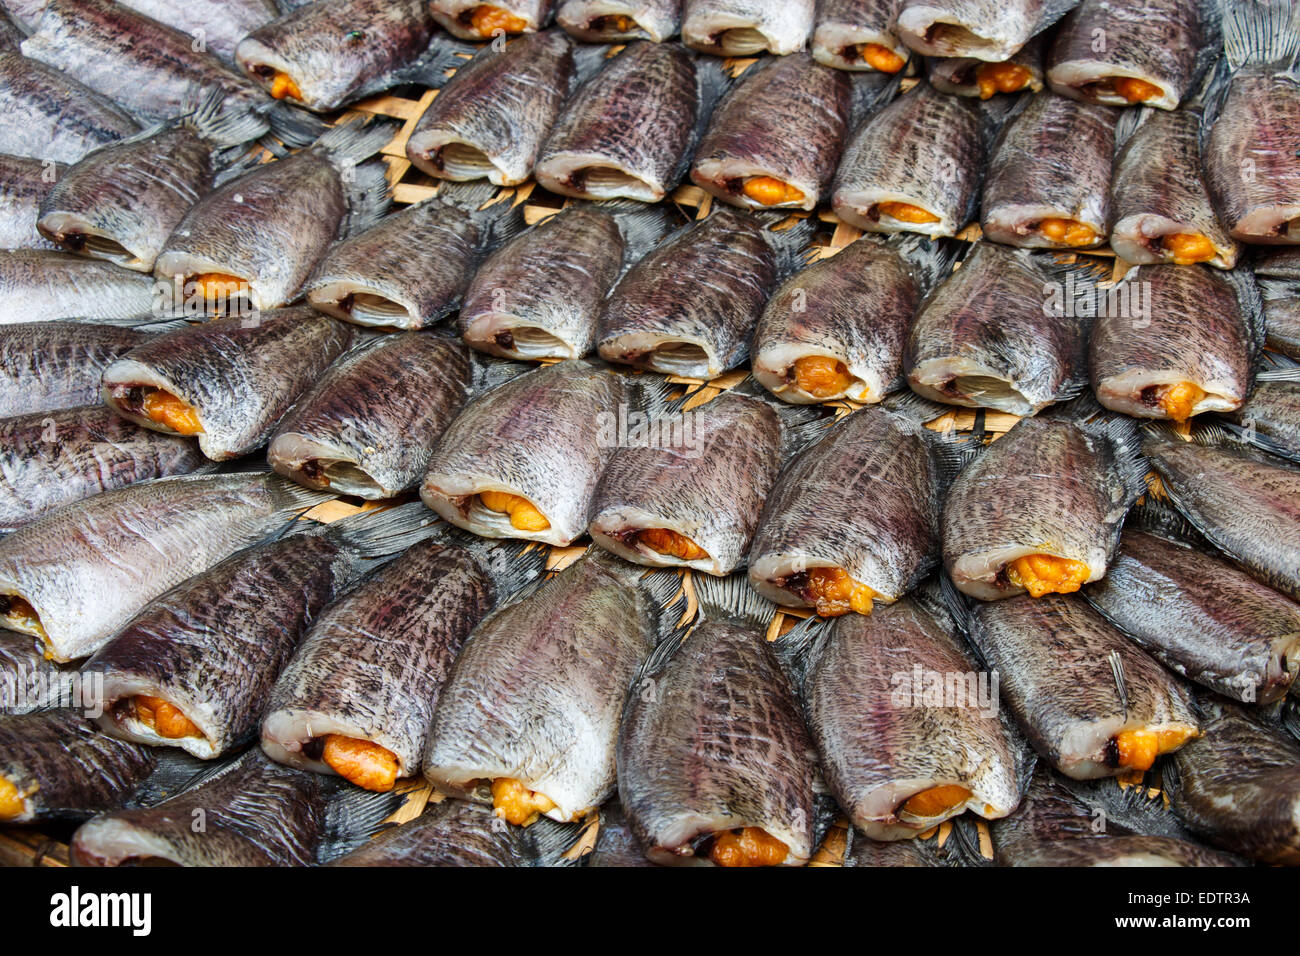 Fishes meat(Trichogaster pectoralis) arrange on rattan in market Stock Photo